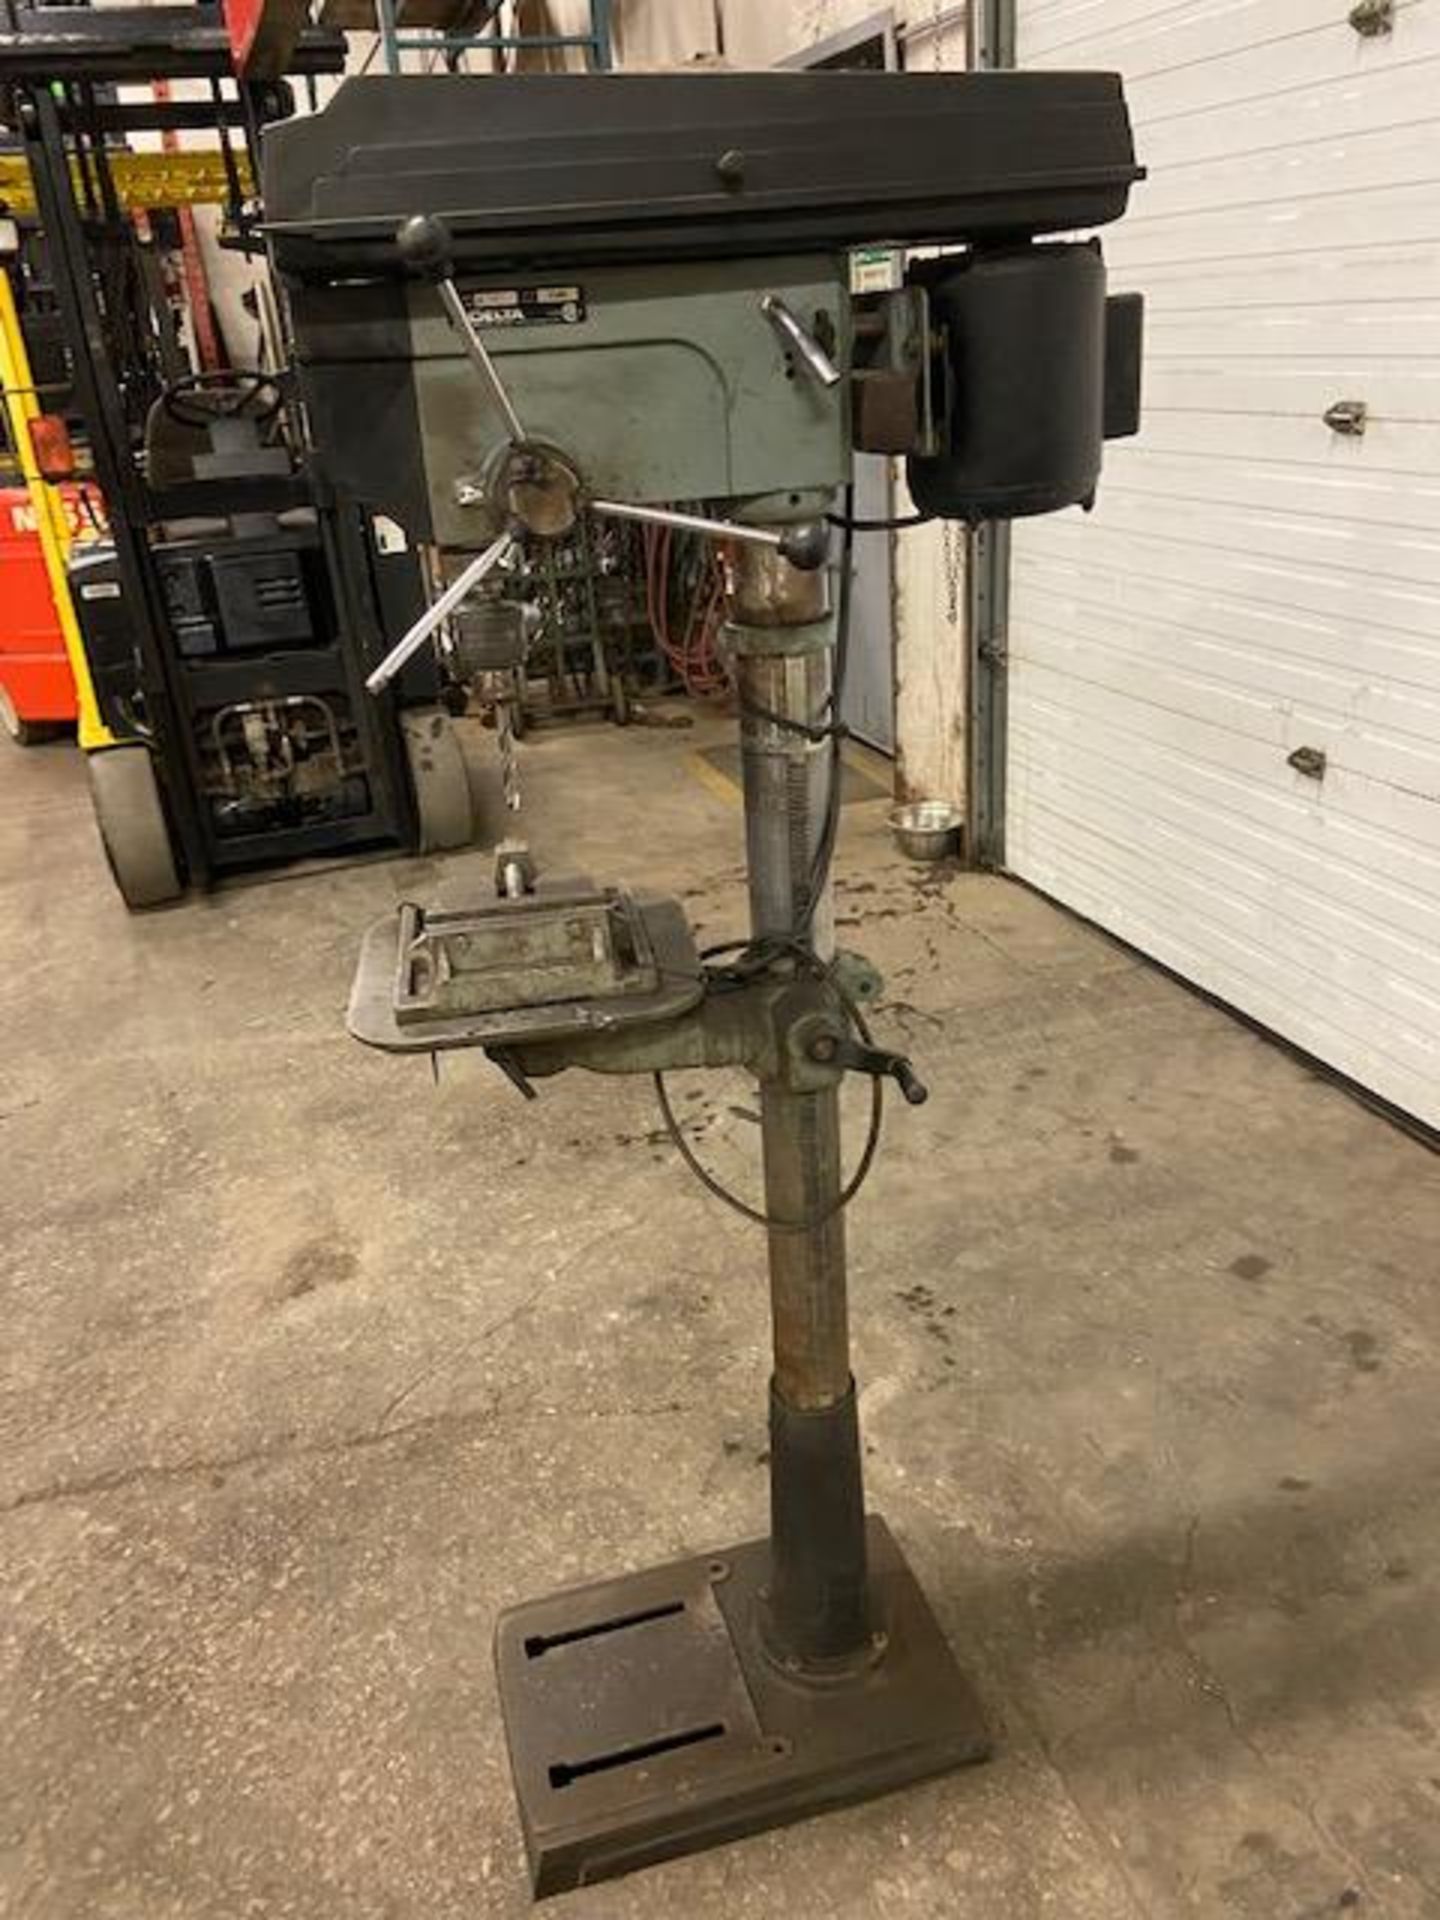 Delta 16.5" Vertical Drill Press Unit with adjustable table CAT 17-901 - Image 2 of 2